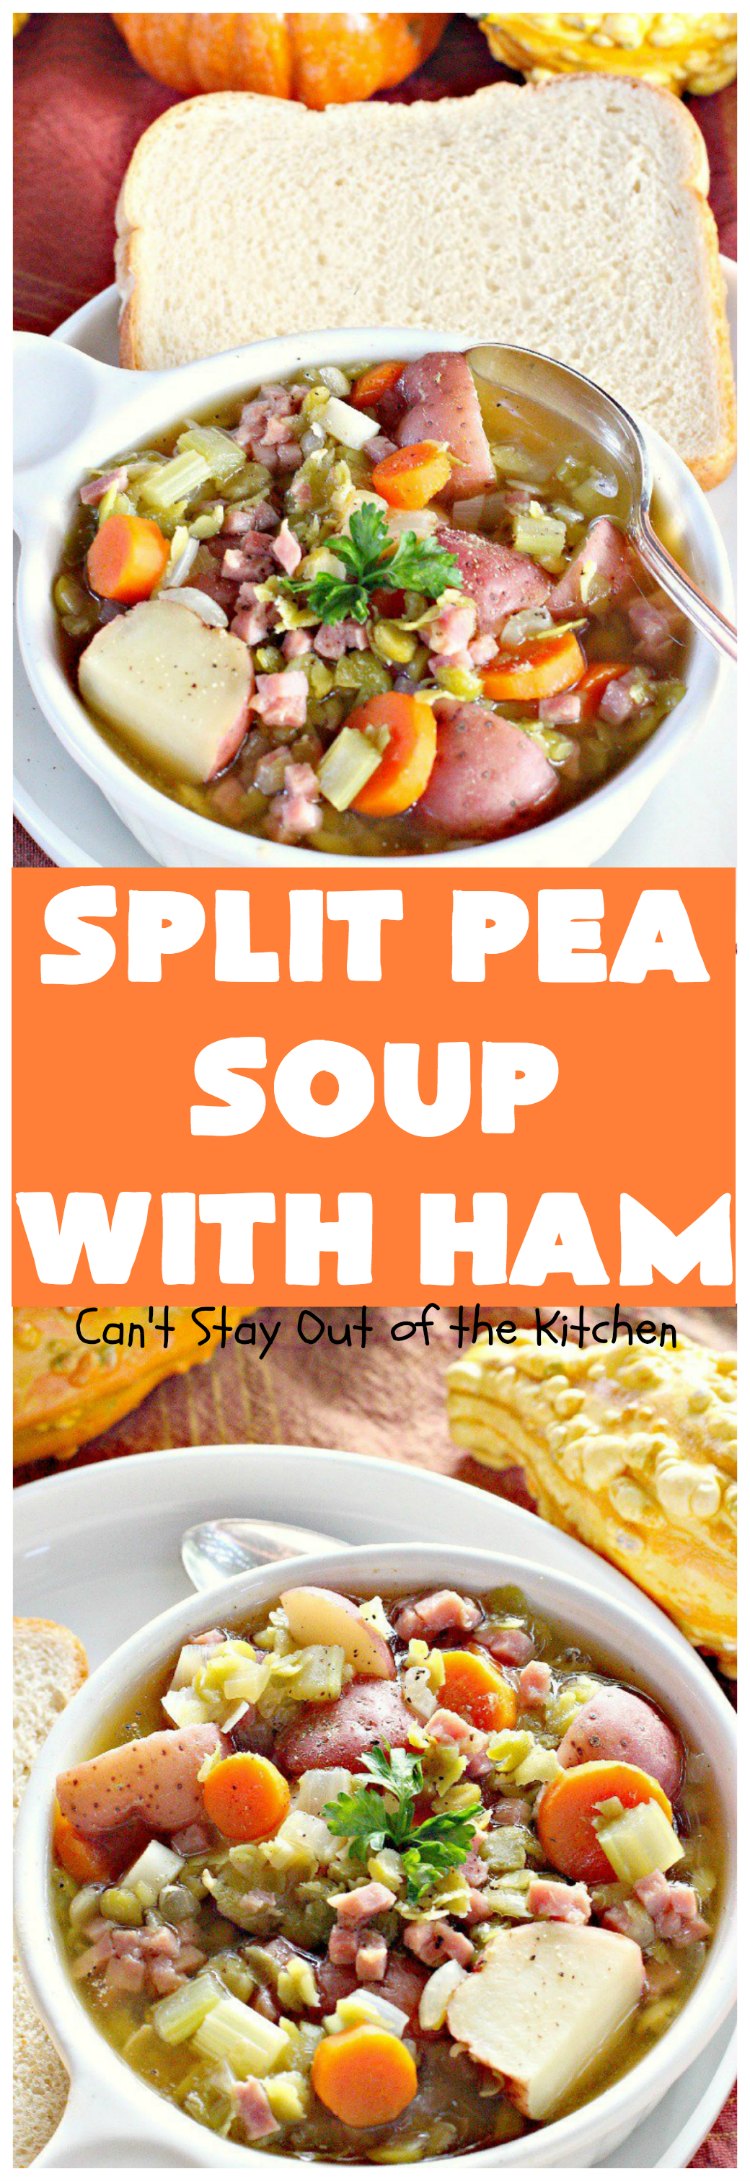 Split Pea Soup with Ham | Can't Stay Out of the Kitchen